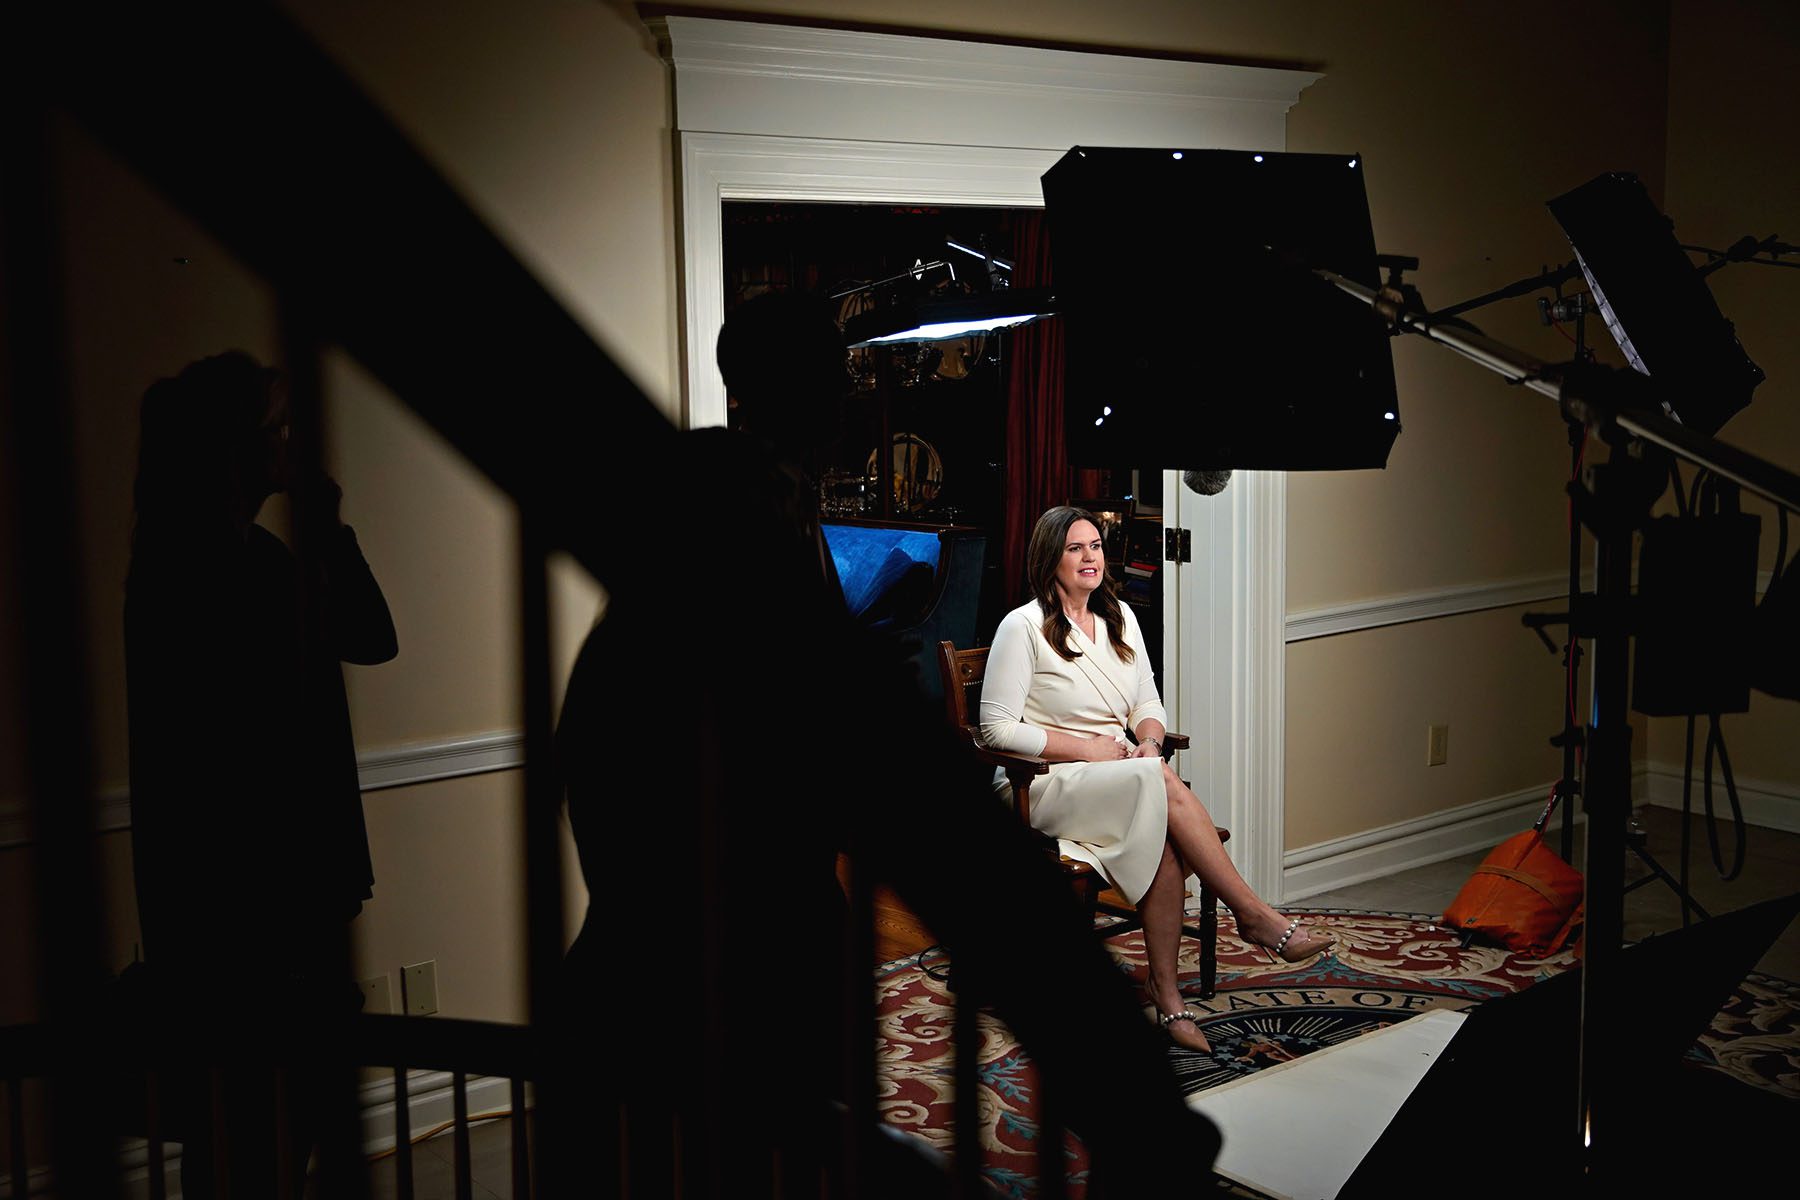 Lighting and camera equipment is seen as Sarah Huckabee Sanders waits to deliver the Republican response to the State of the Union address.